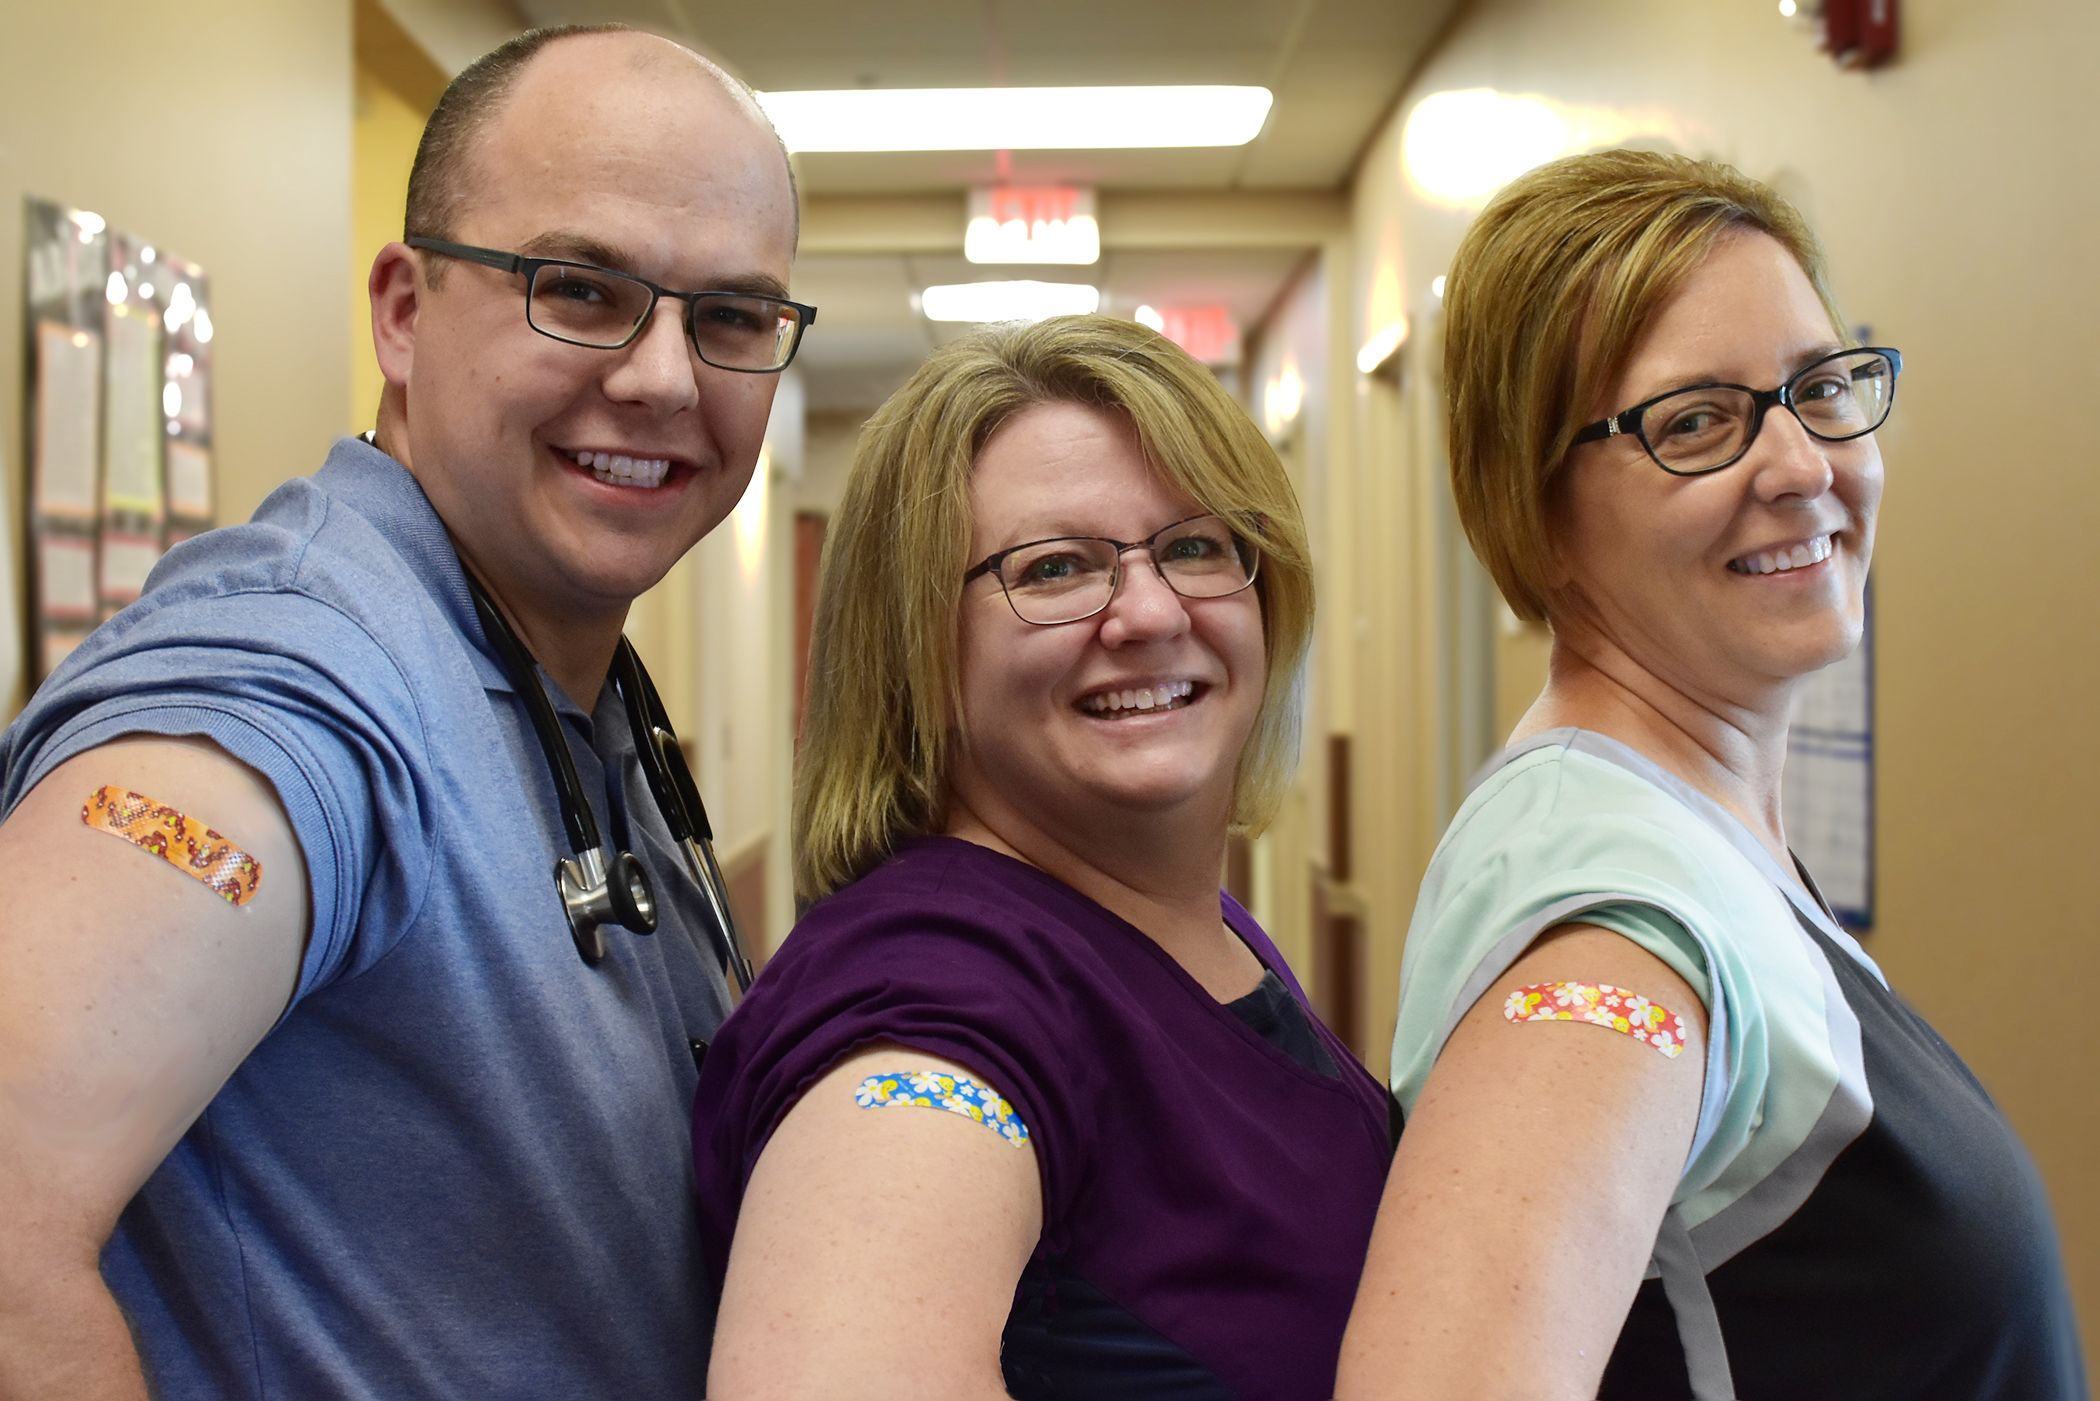 Get Your Flu Shot! Clinics and Drive-Through's Announced today